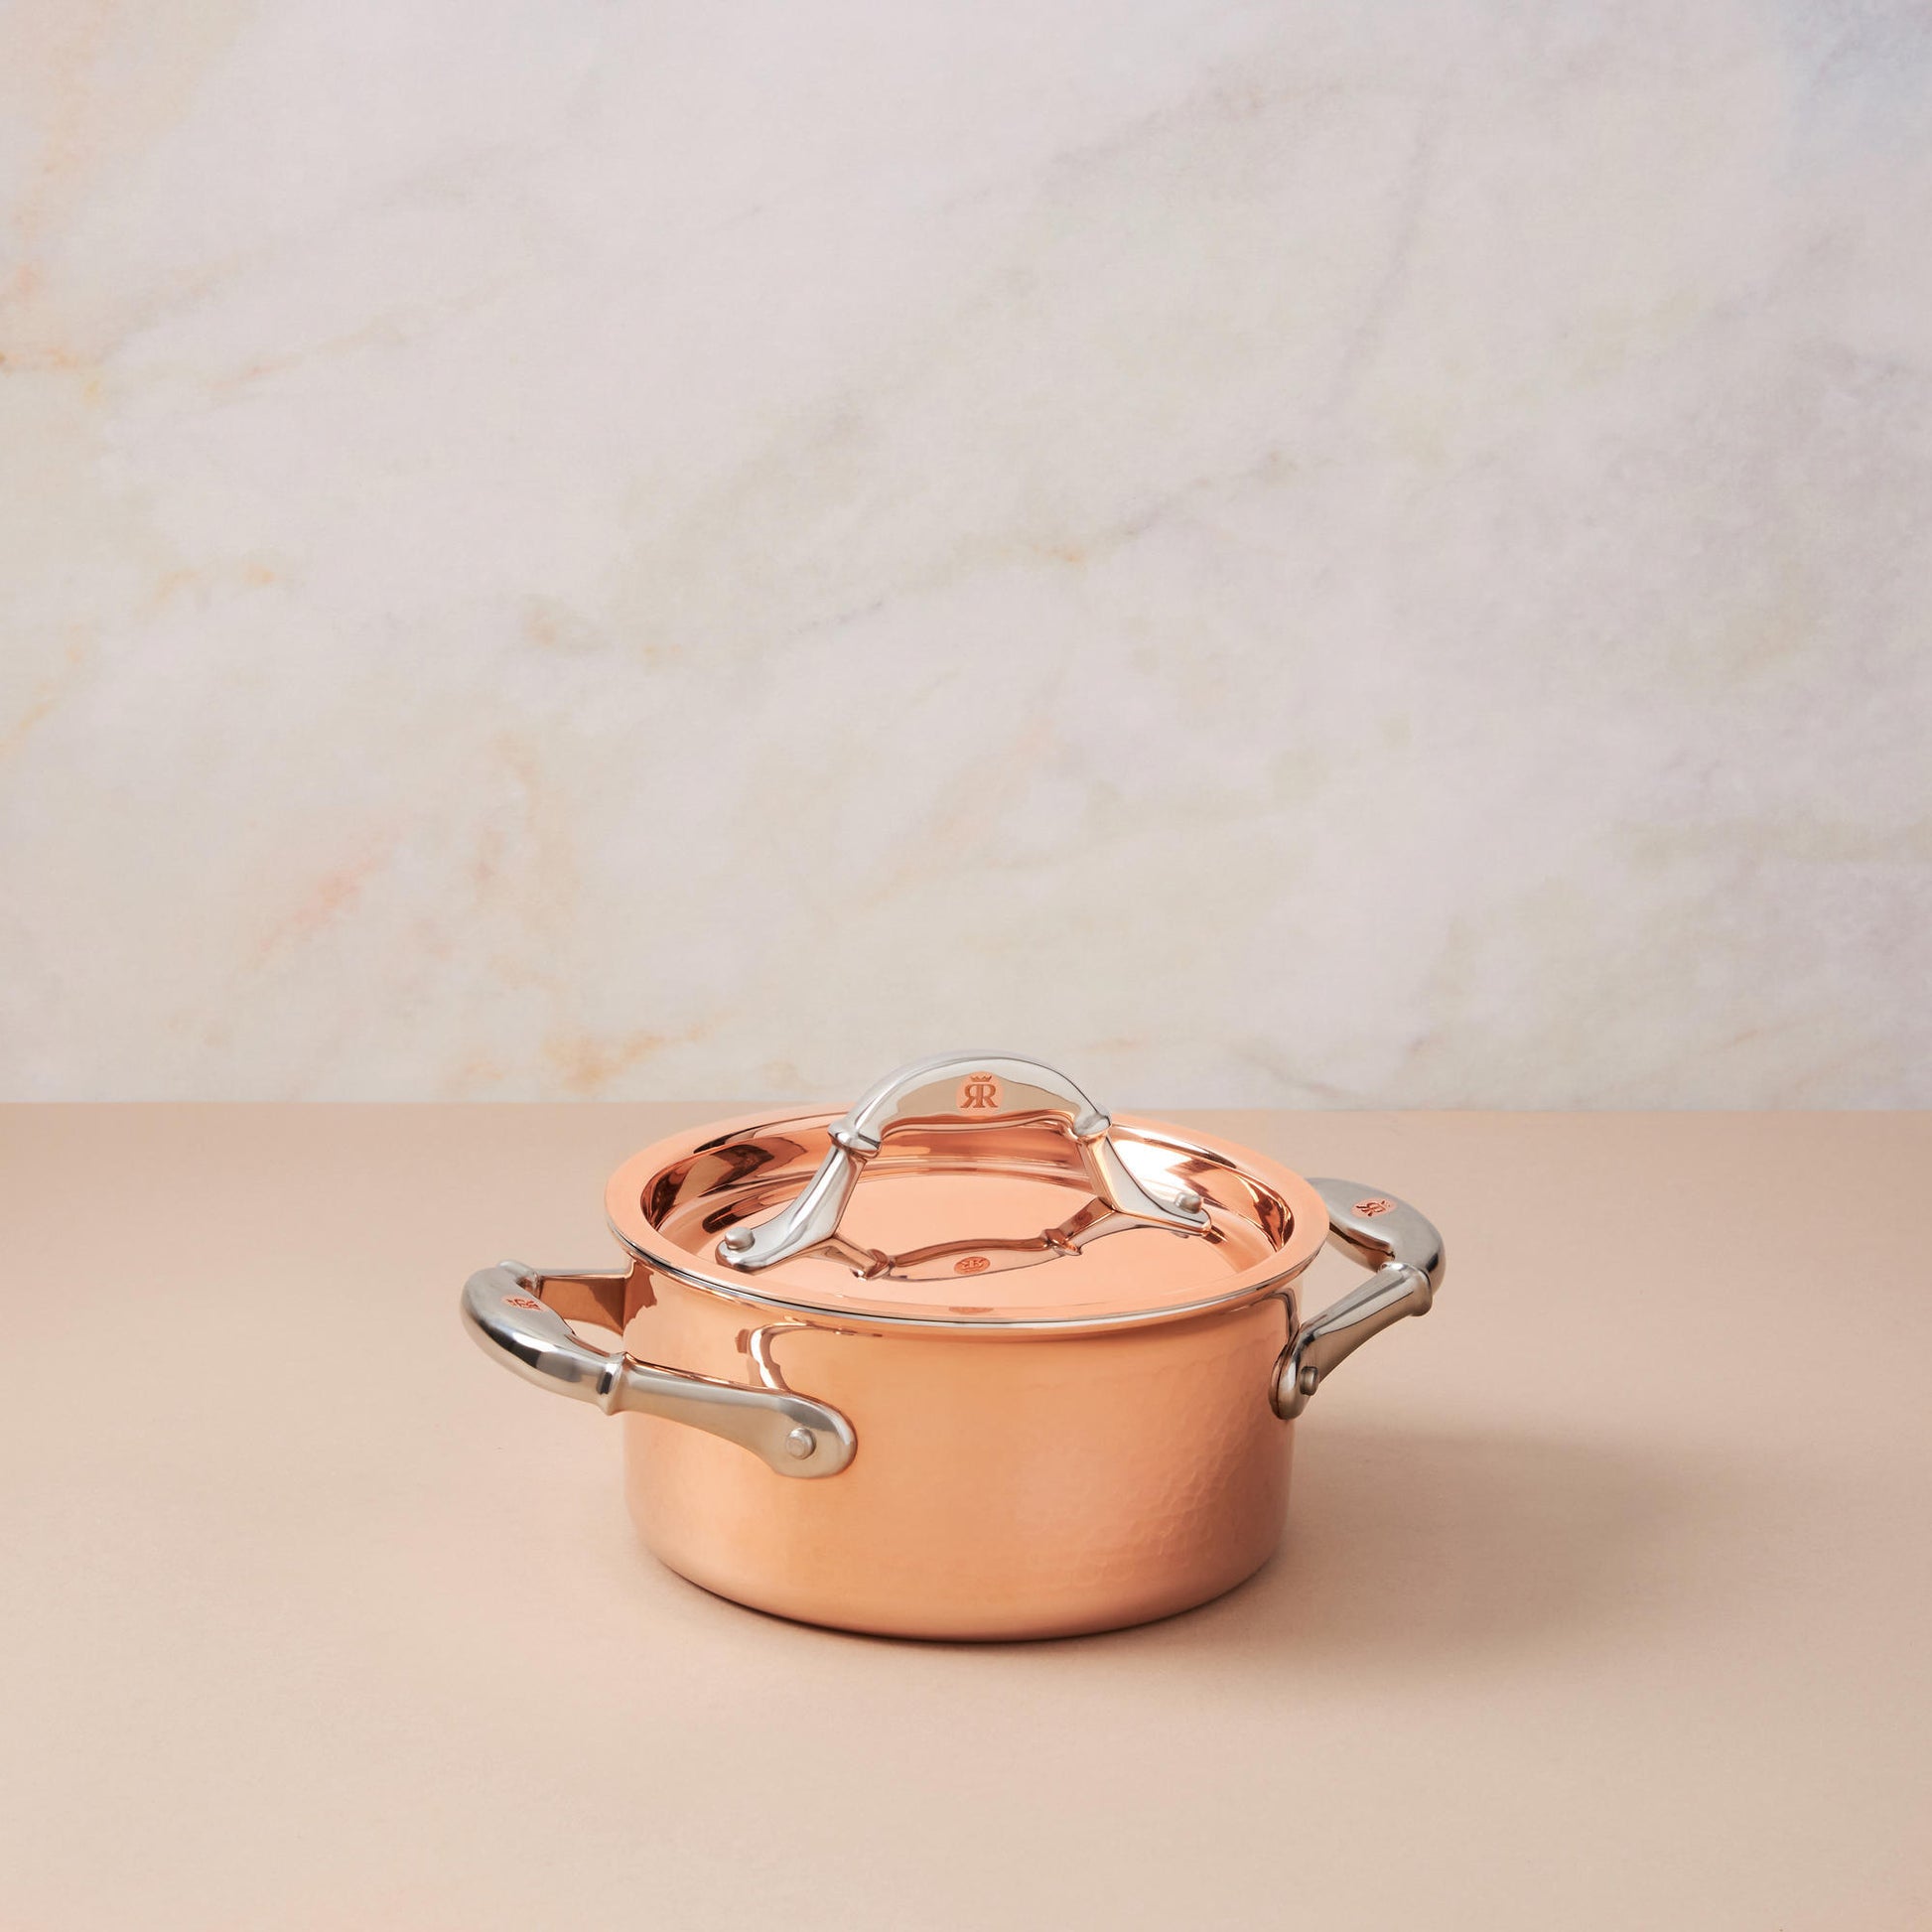  Saucepot with lid in hammered copper with stainless steel lining from Ruffoni